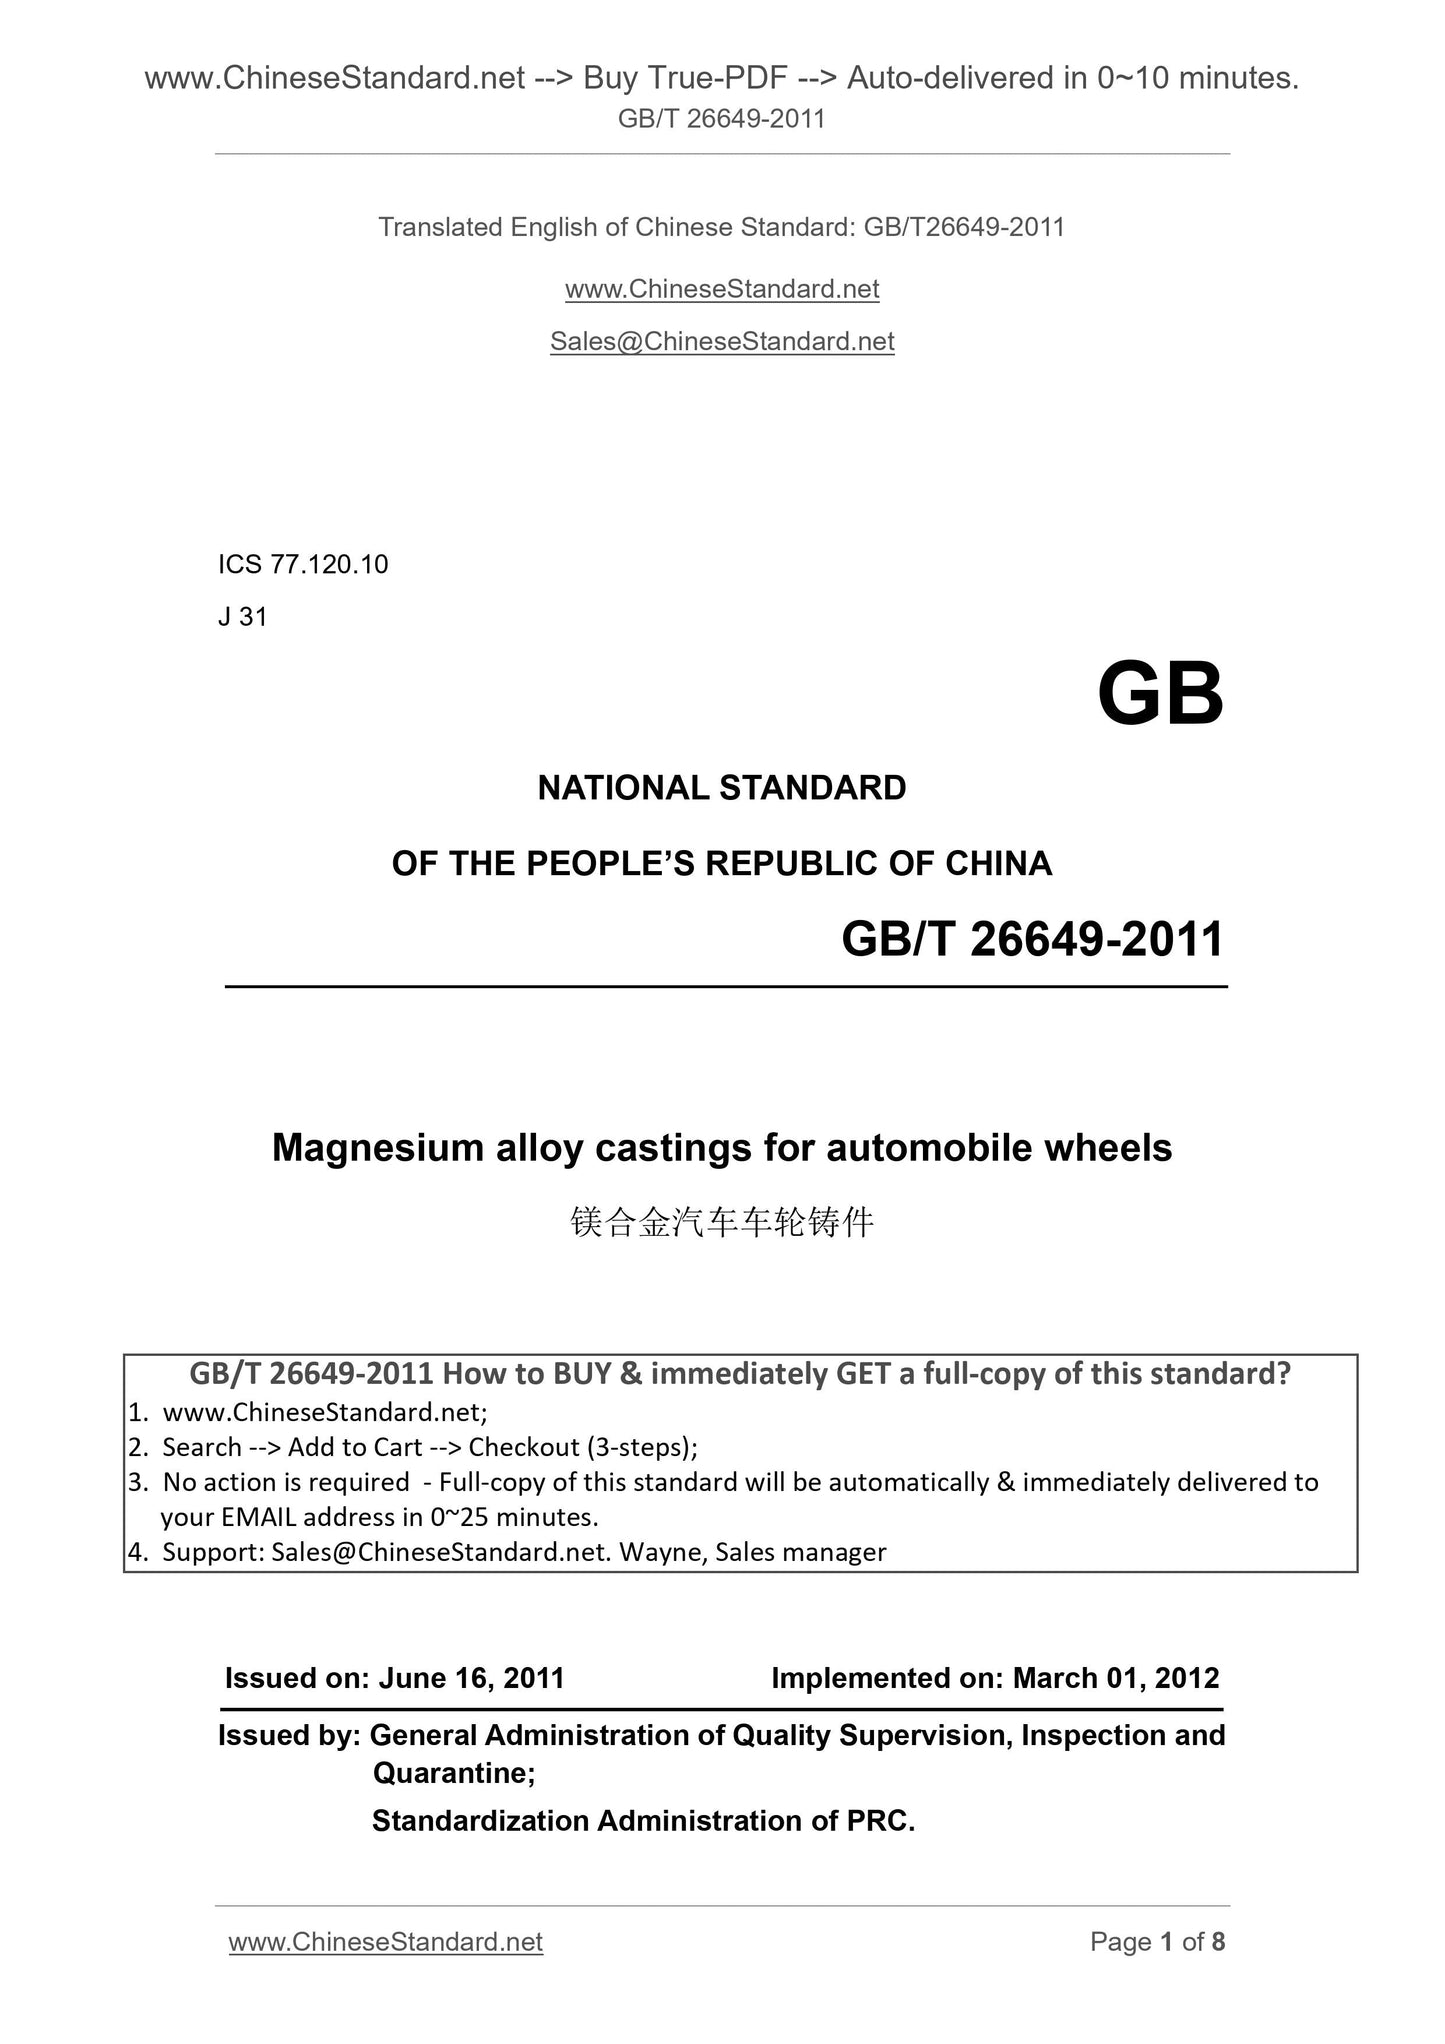 GB/T 26649-2011 Page 1